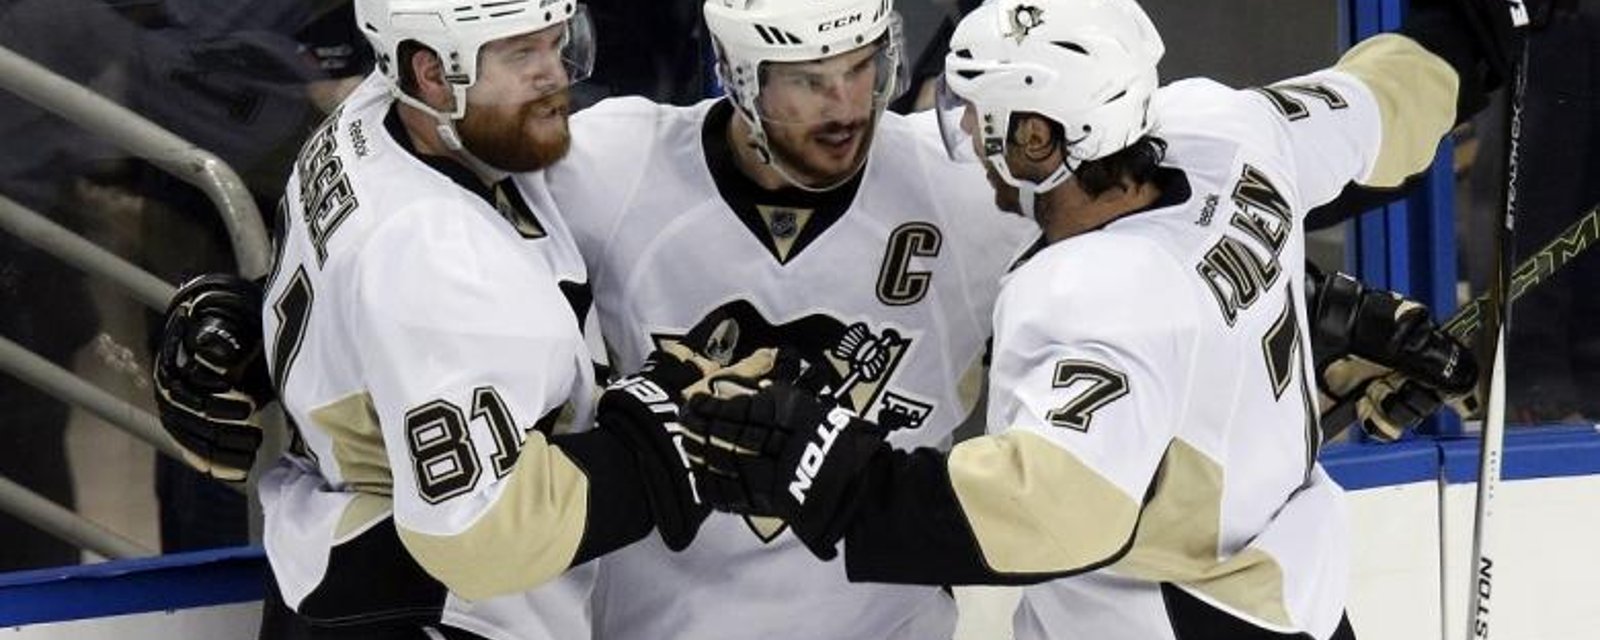 Veteran to play one more season after Cup win, but it may not be with Penguins.